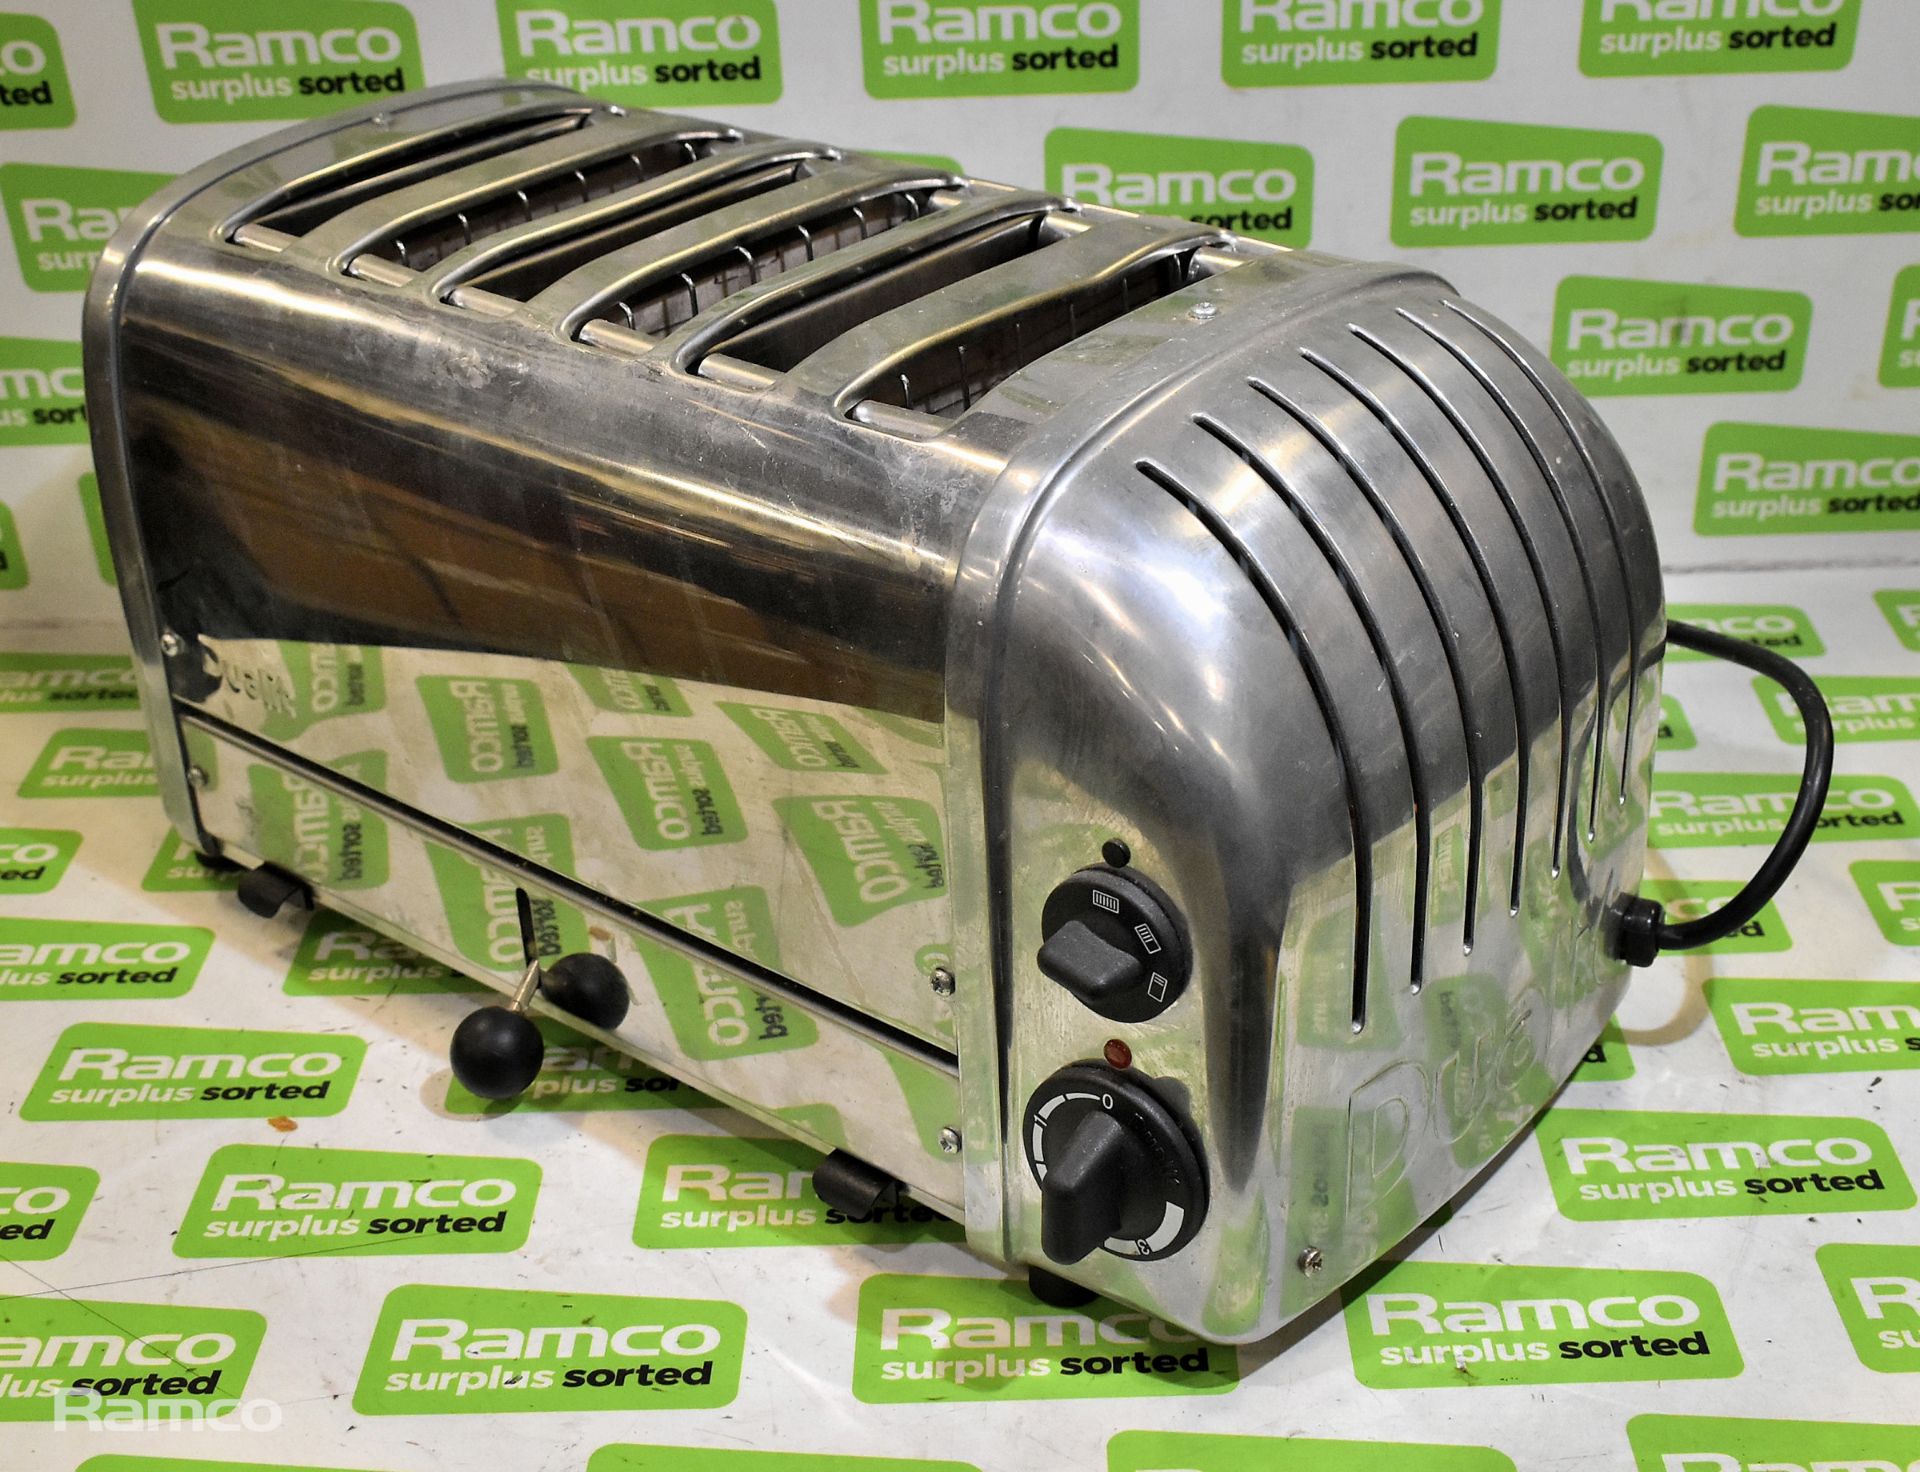 Dualit stainless steel 6 slice toaster - Image 3 of 4